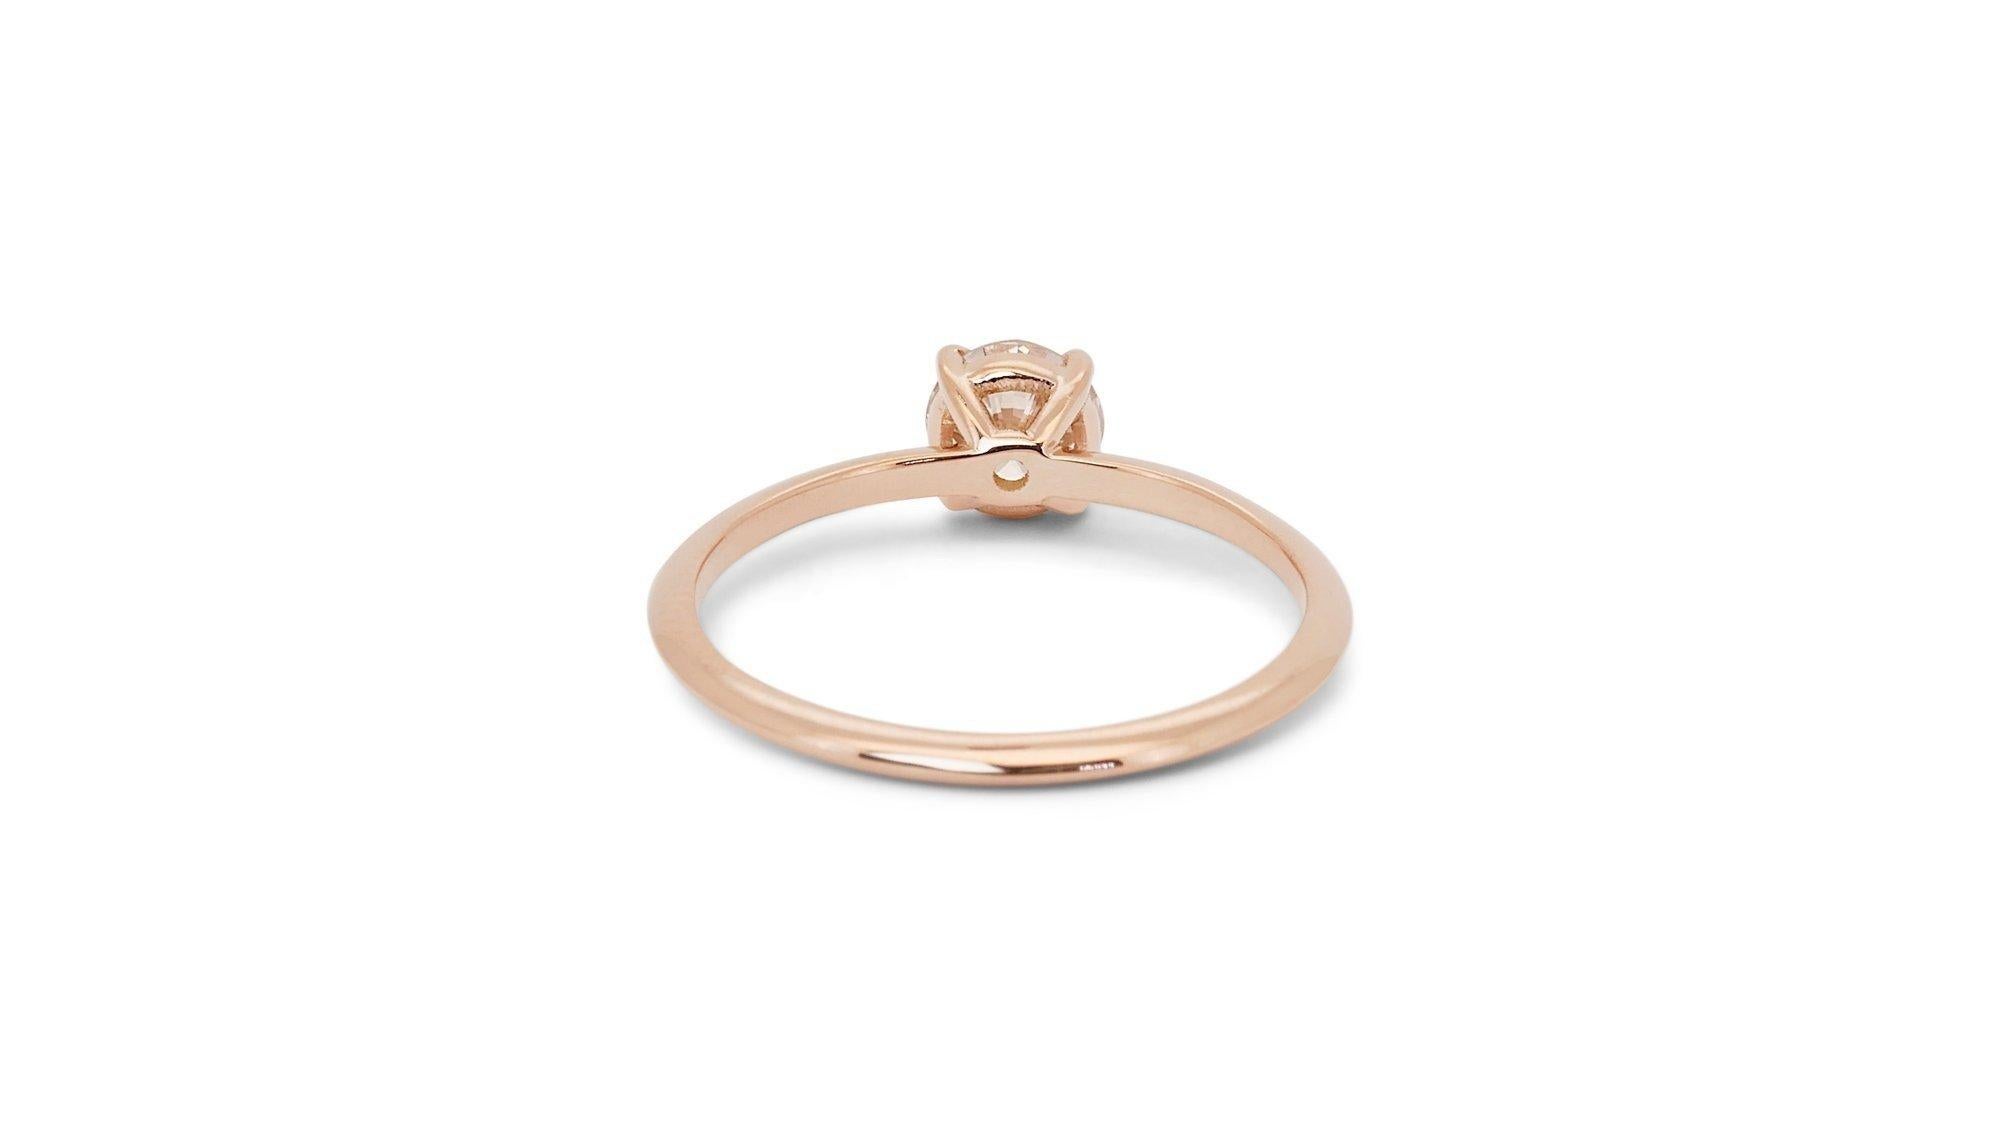 Timeless 0,80ct Diamond Solitaire Ring in 18k Rose Gold - GIA zertifiziert im Angebot 2